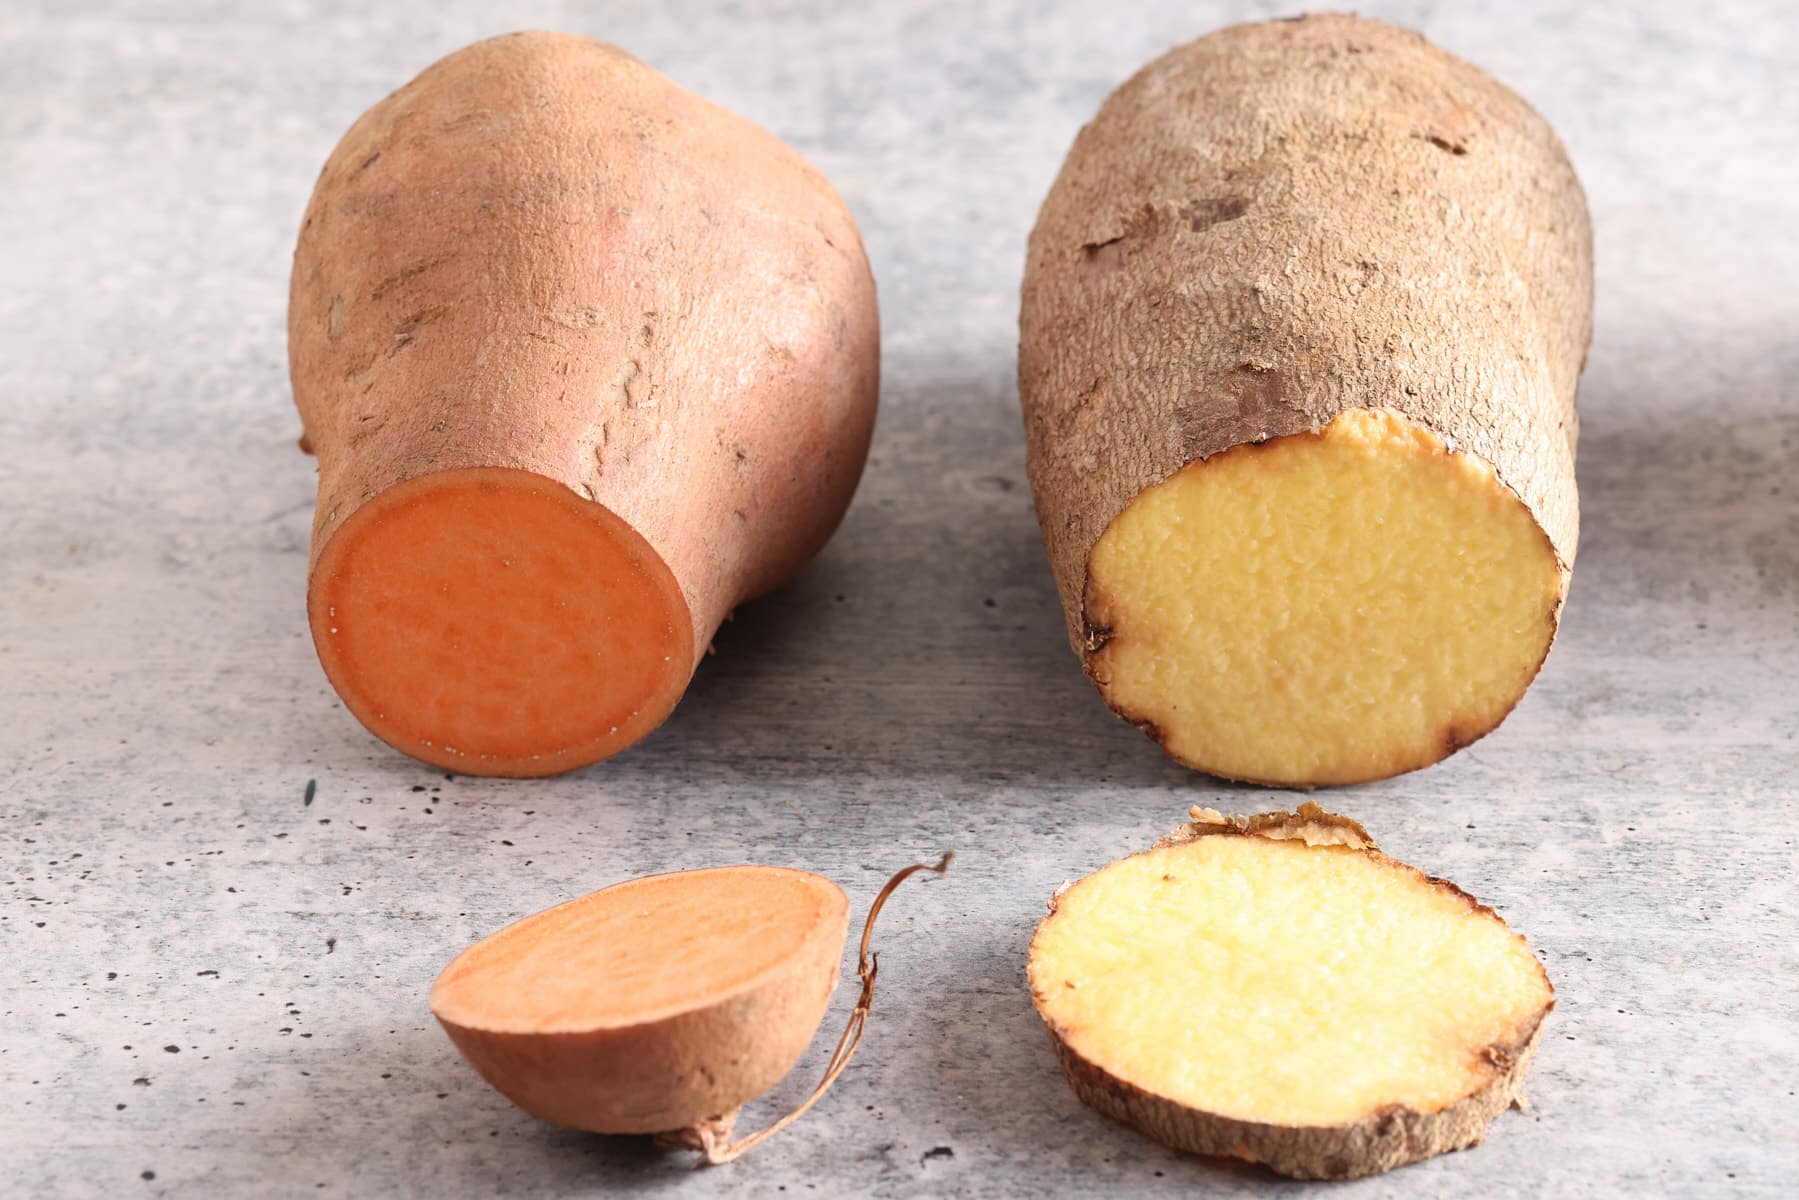 when is a yam actually a sweet potato?